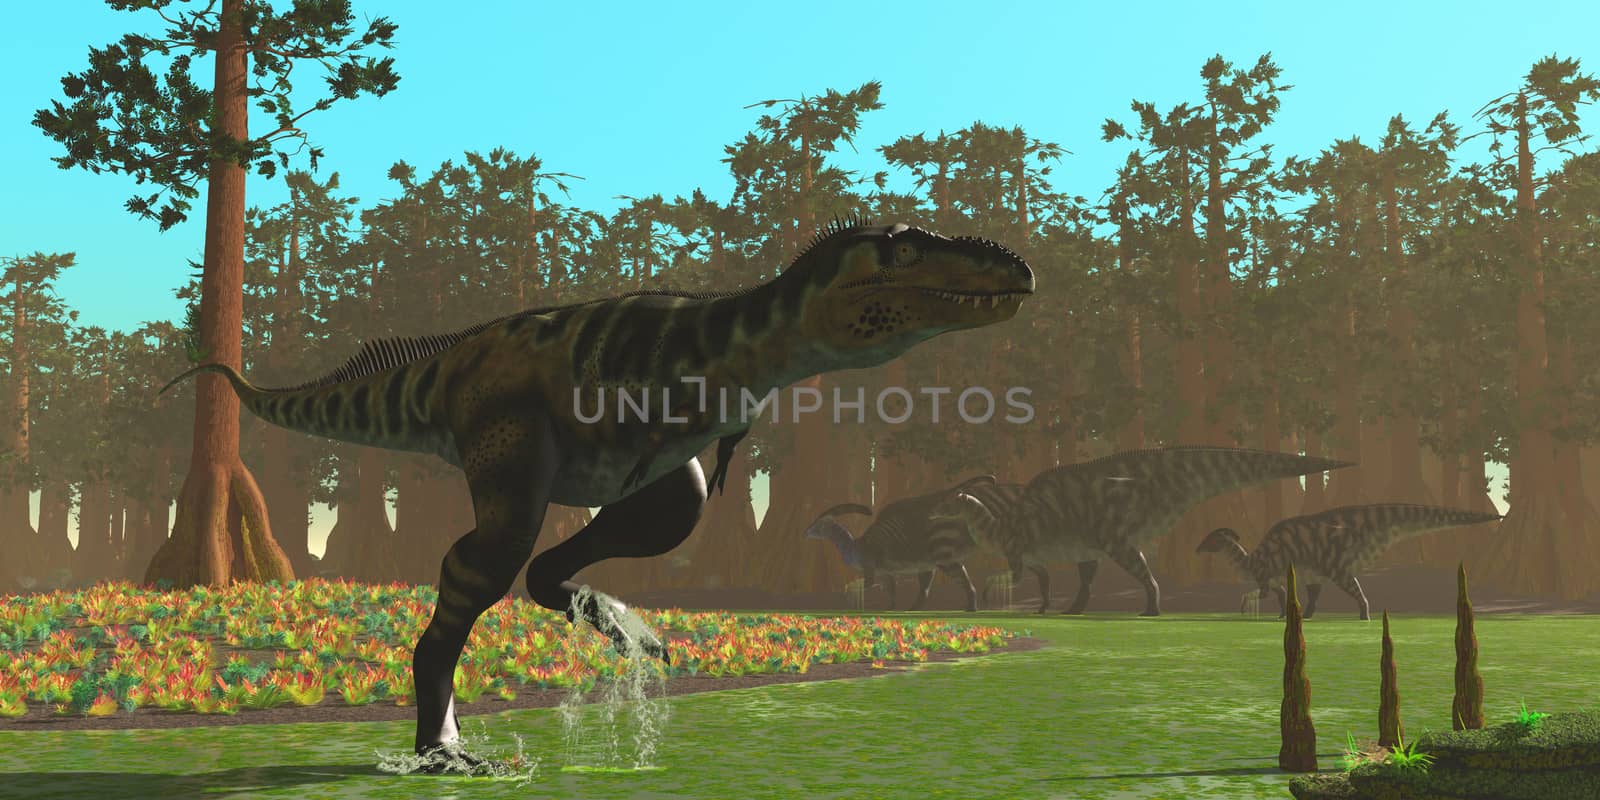 Parasaurolophus dinosaurs head the other way as a Bistahieversor carnivore splashes through a swampy area.